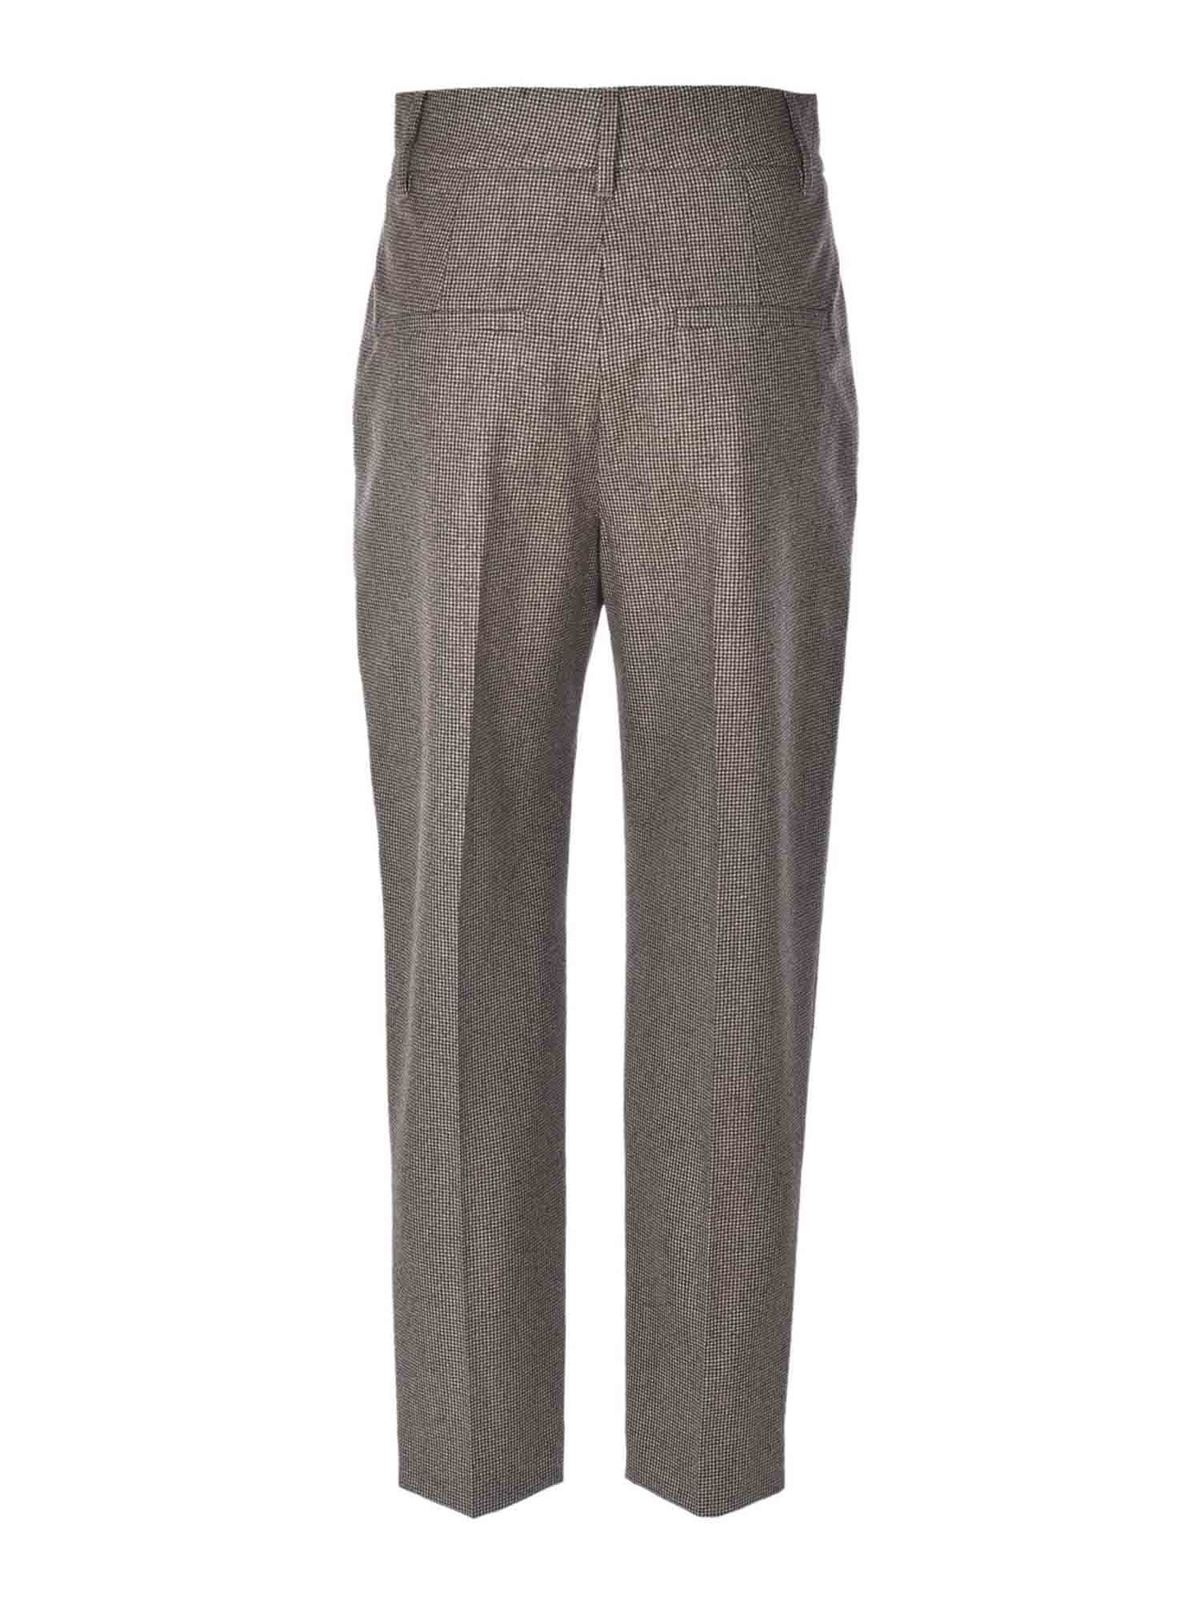 Brunello Cucinelli - Houndstooth pants in brown - casual trousers ...